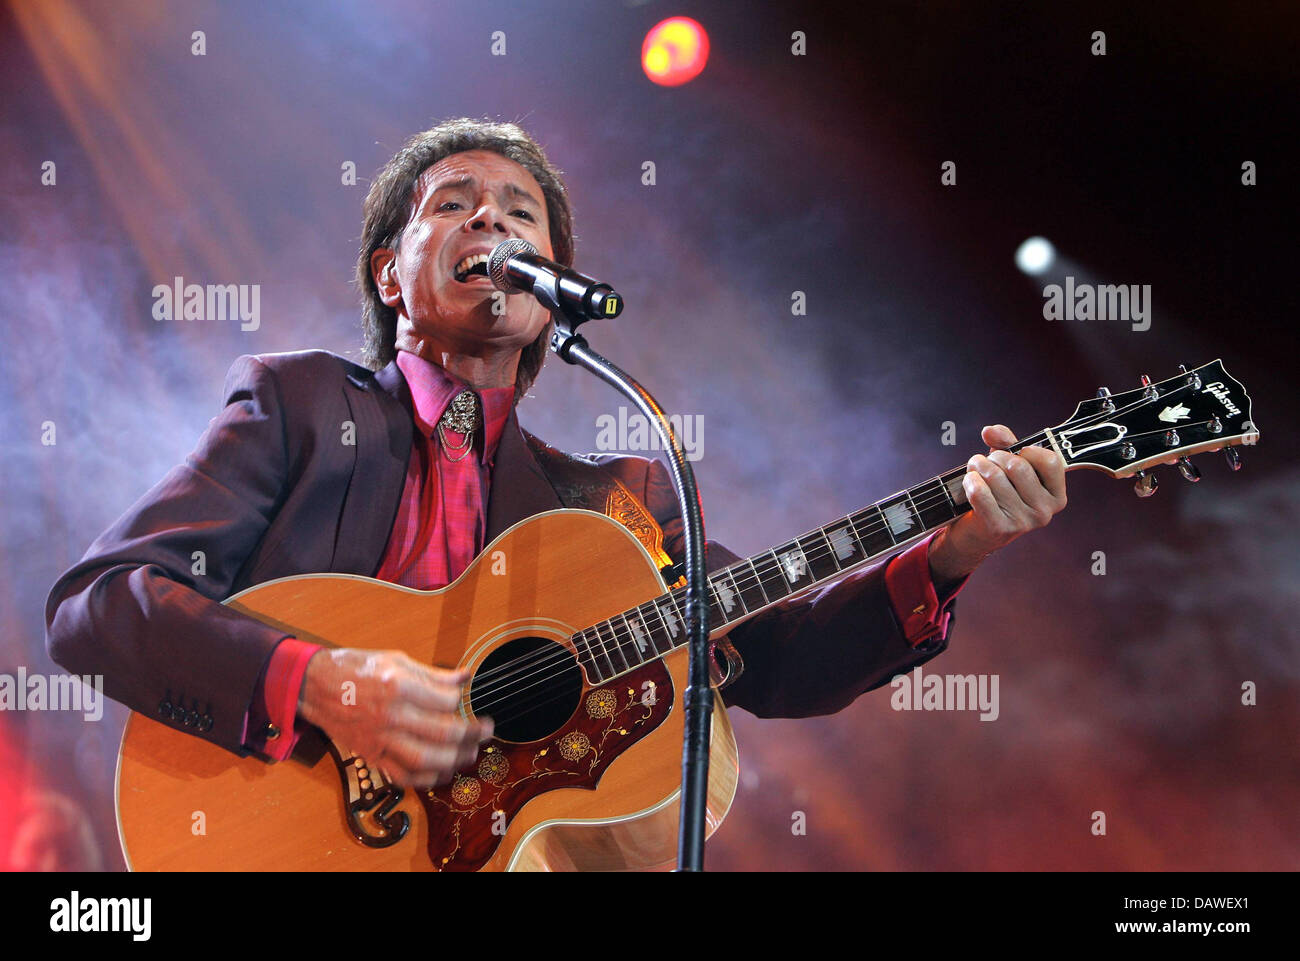 British singer Sir Cliff Richard pictured singing at the TUI Arena of Hanover, Germany, 24 March 2007. On his world tour Sir Cliff stopped for two concerts in Germany. Photo: Peter Steffen Stock Photo